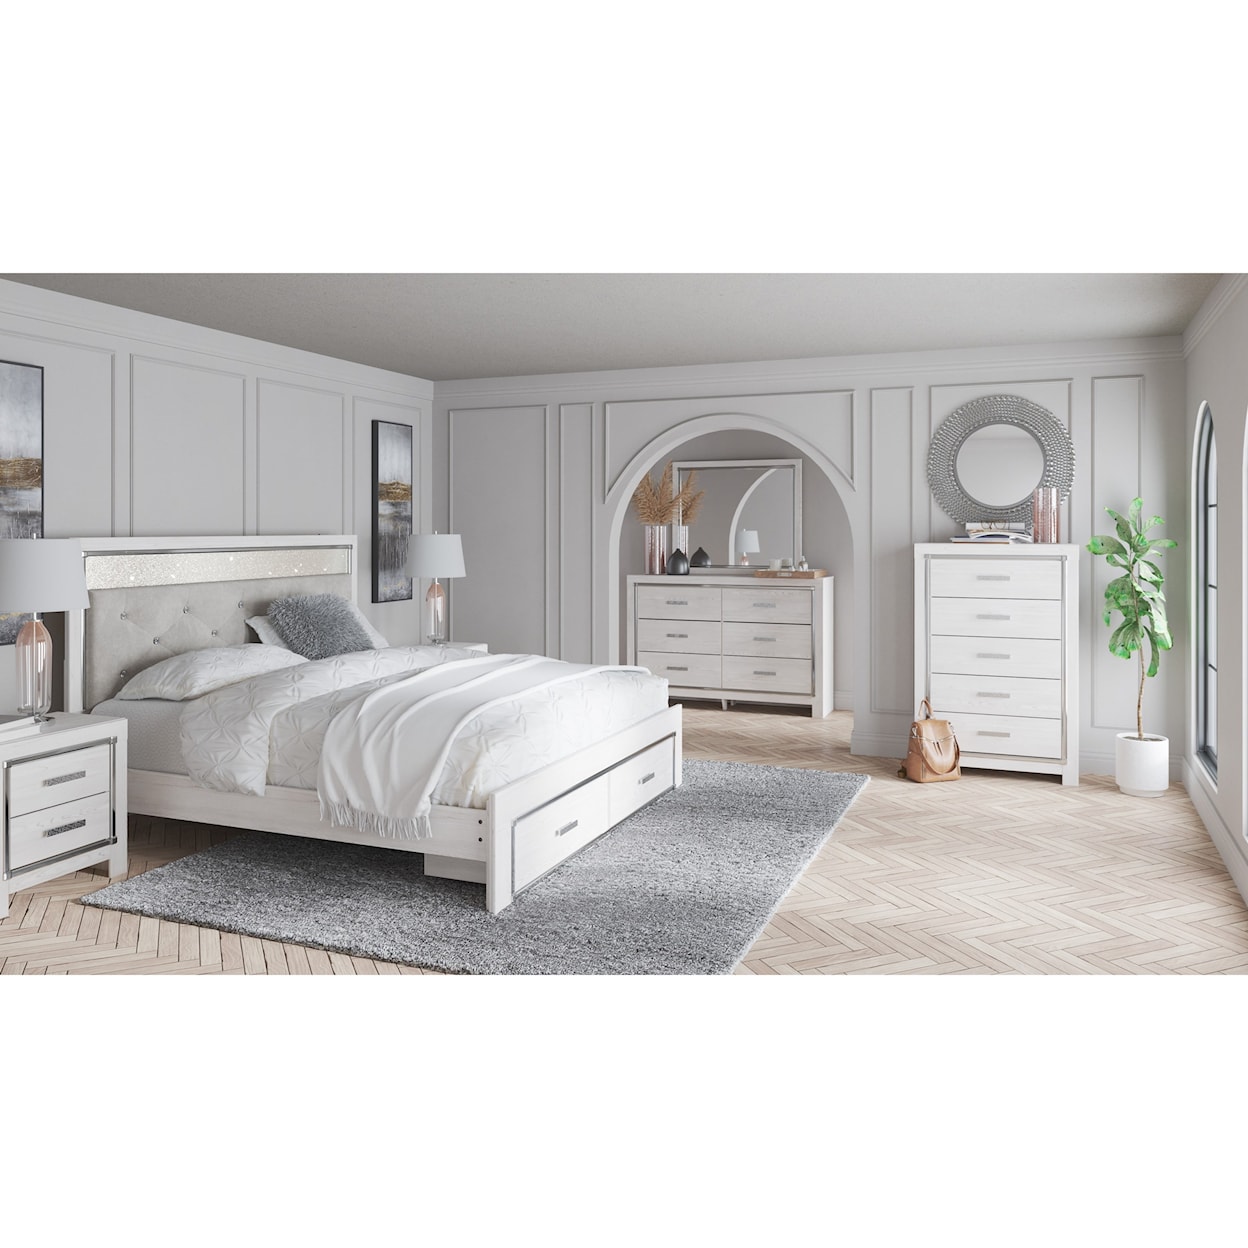 Signature Altyra King Bedroom Group